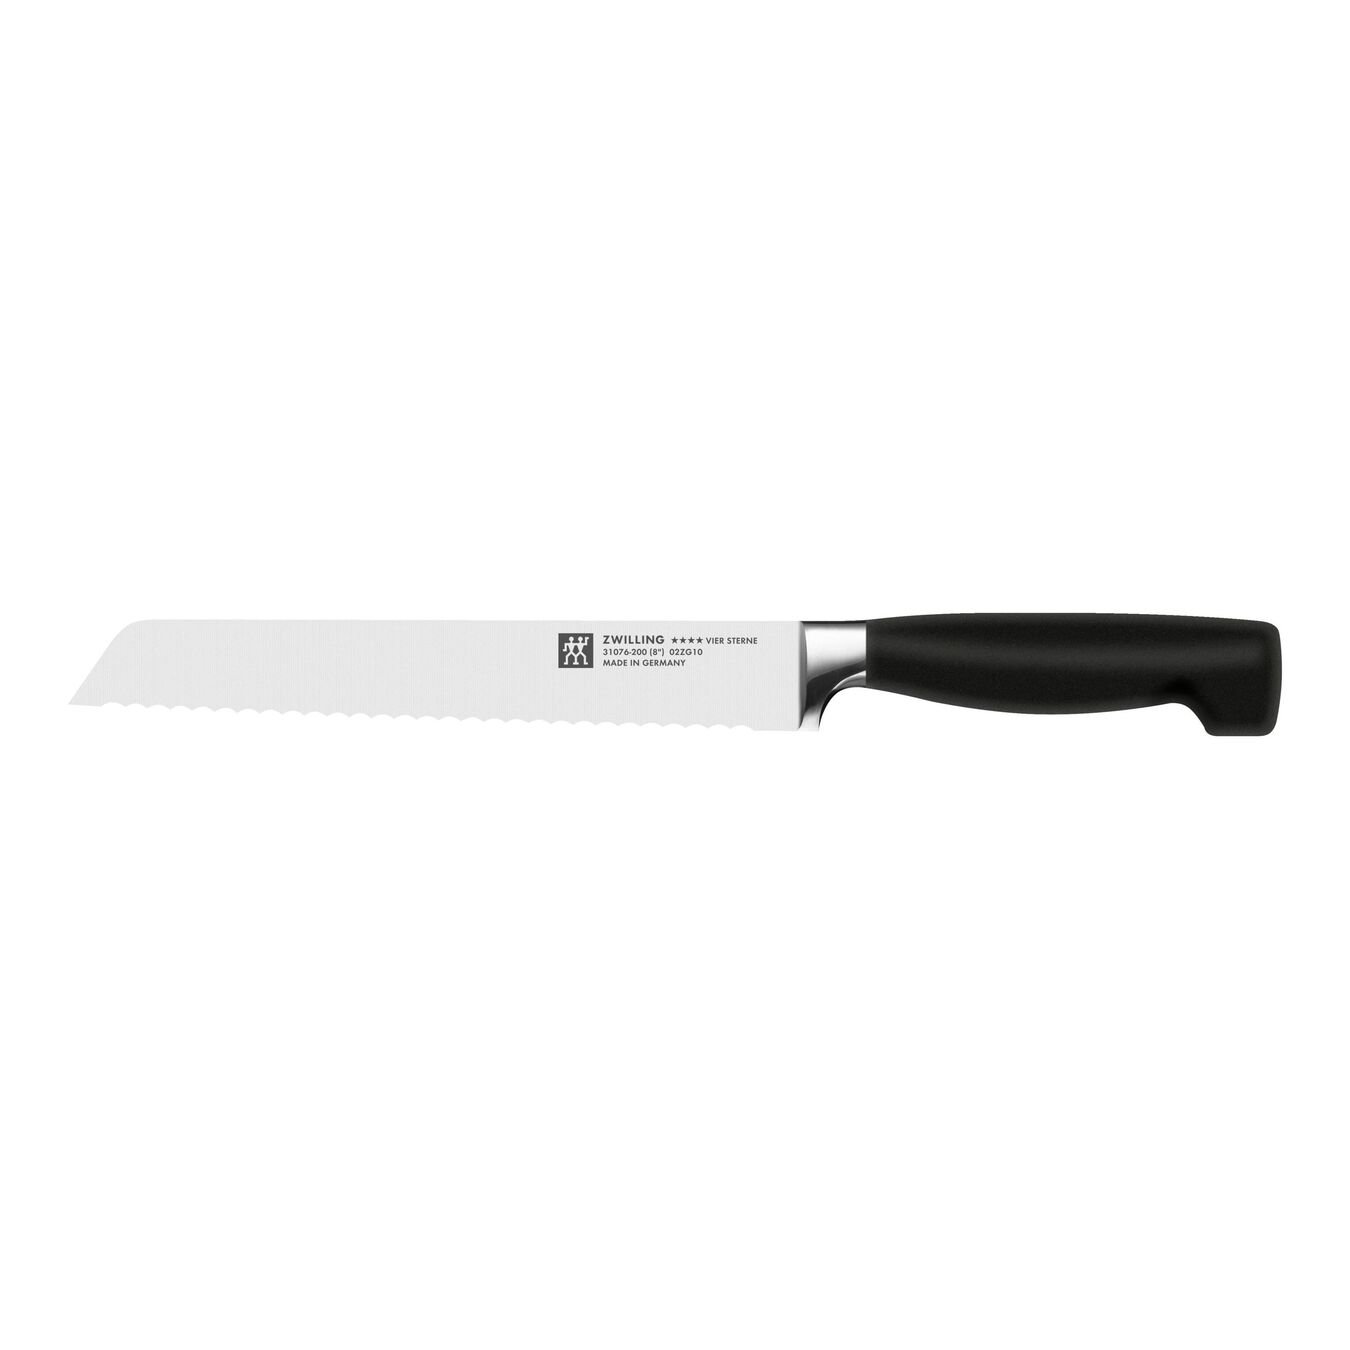 8 inch Bread knife,,large 1